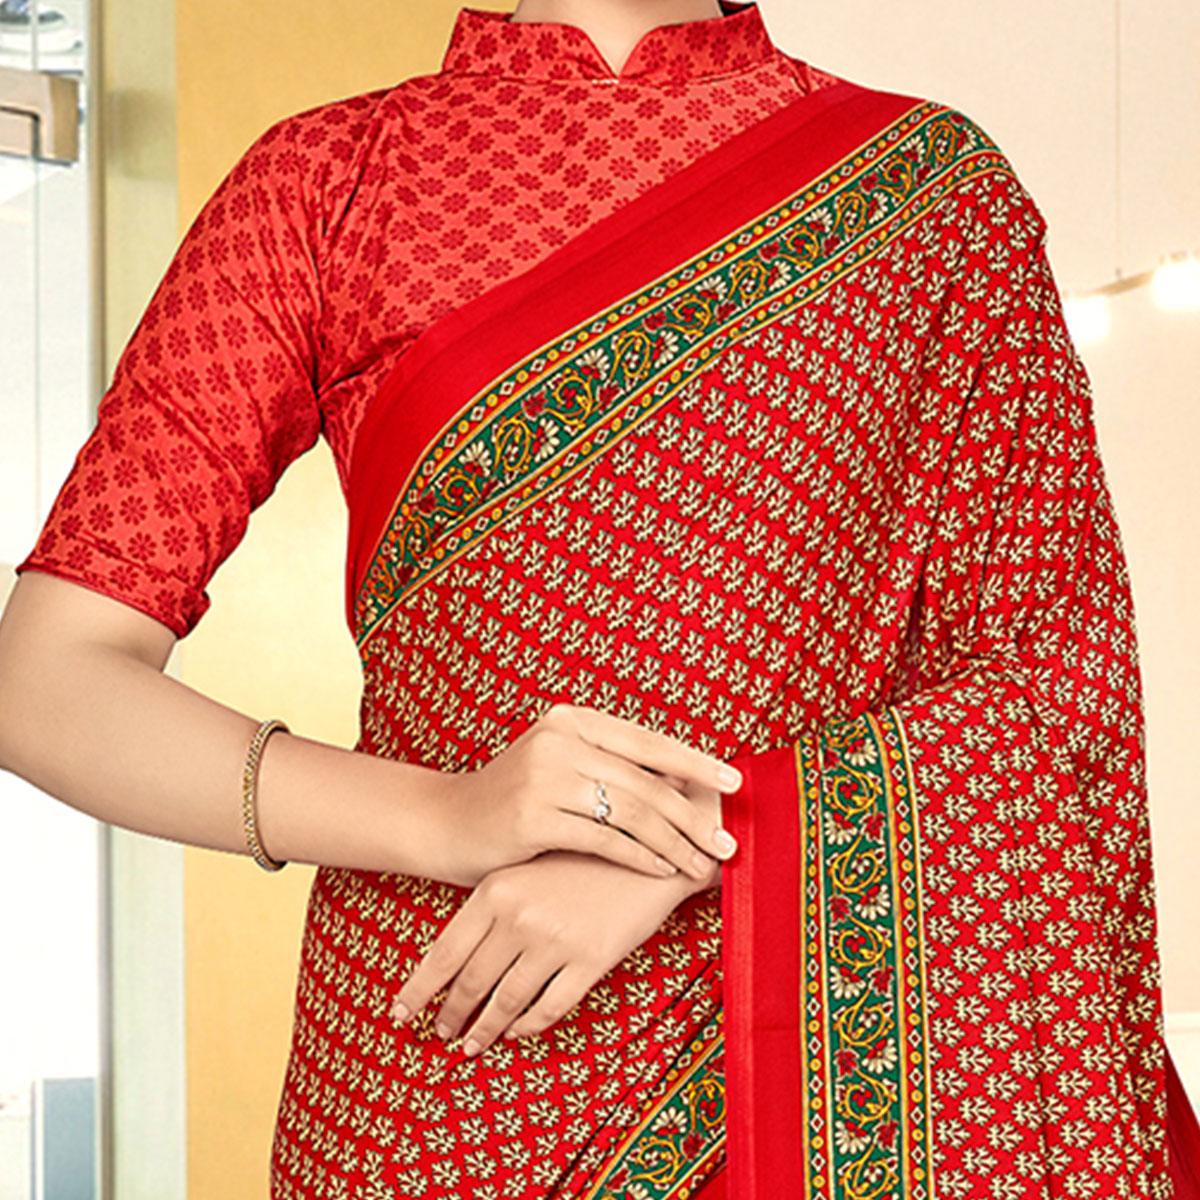 Sophisticated Red Coloured Casual Wear Printed Crepe Saree - Peachmode